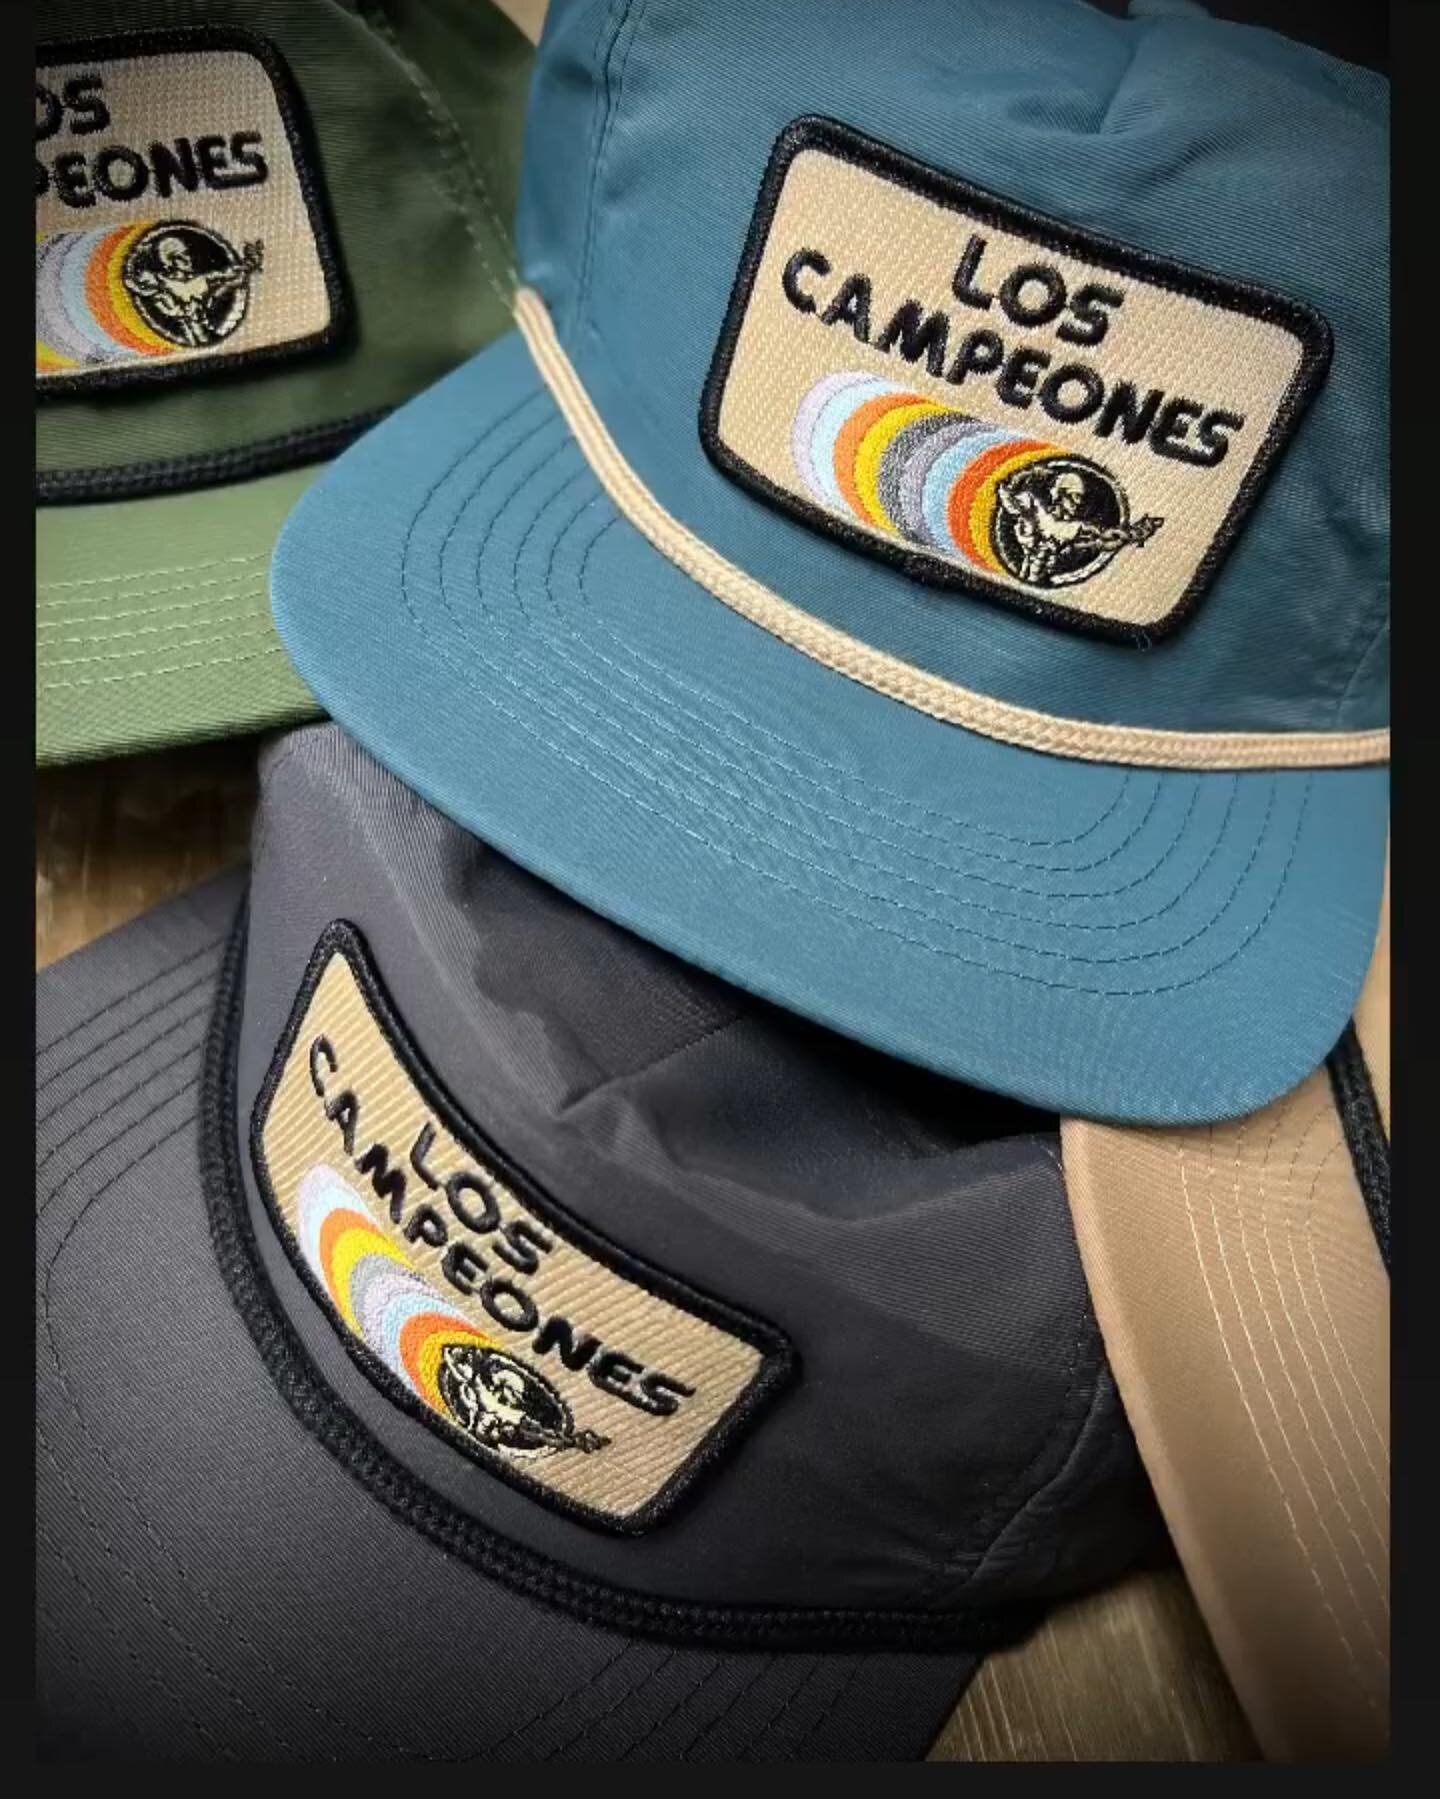 Did a nice vintage inspired logo on patched hats for Los Campeones.